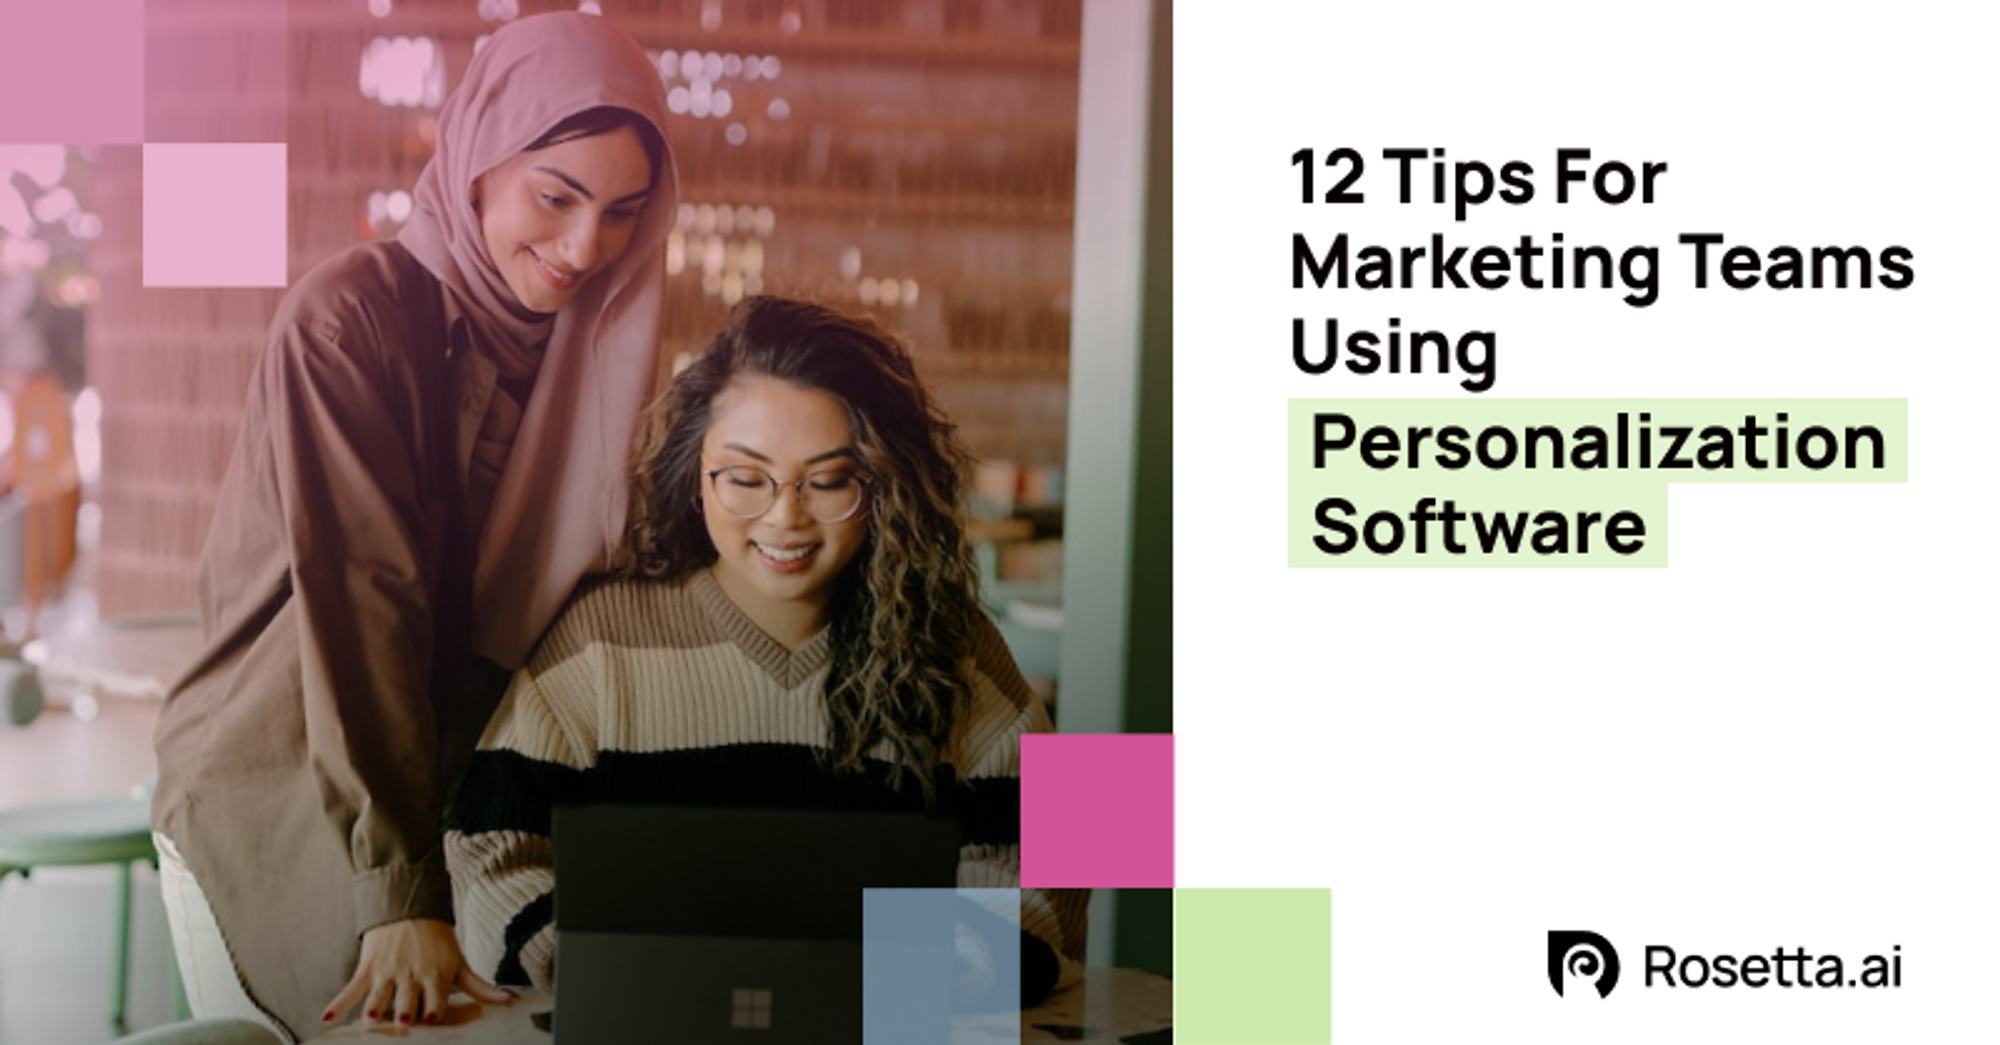 12 Tips For Marketing Teams Using Personalization Software